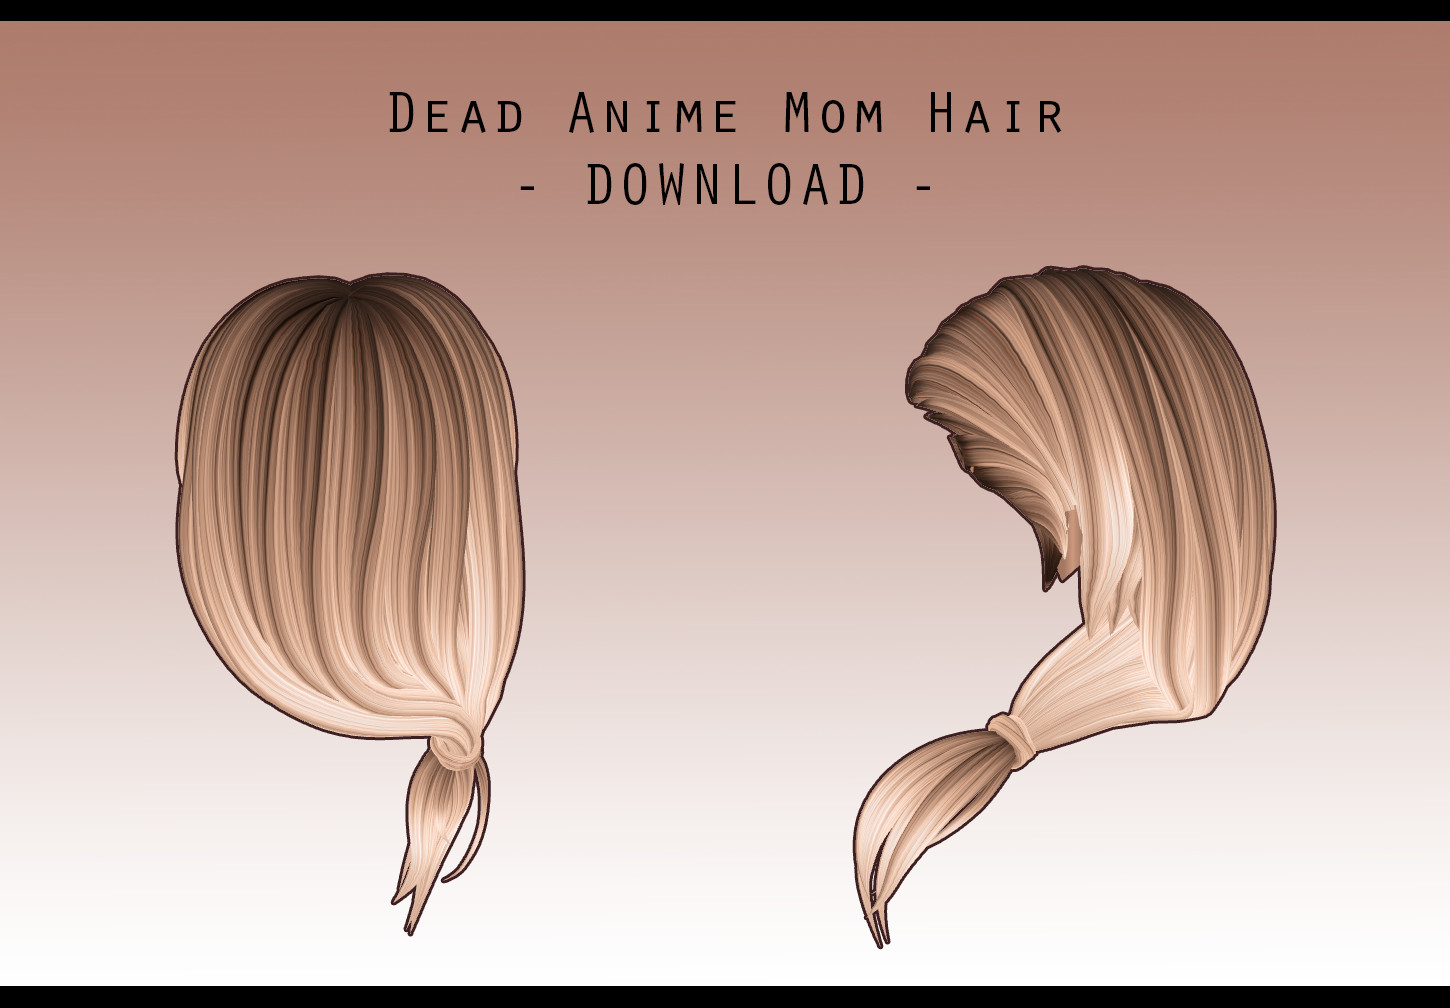 Dead Anime Mom Hairstyle
 Dead Anime Mom back Hair [ DOWNLOAD ] by avant garde on